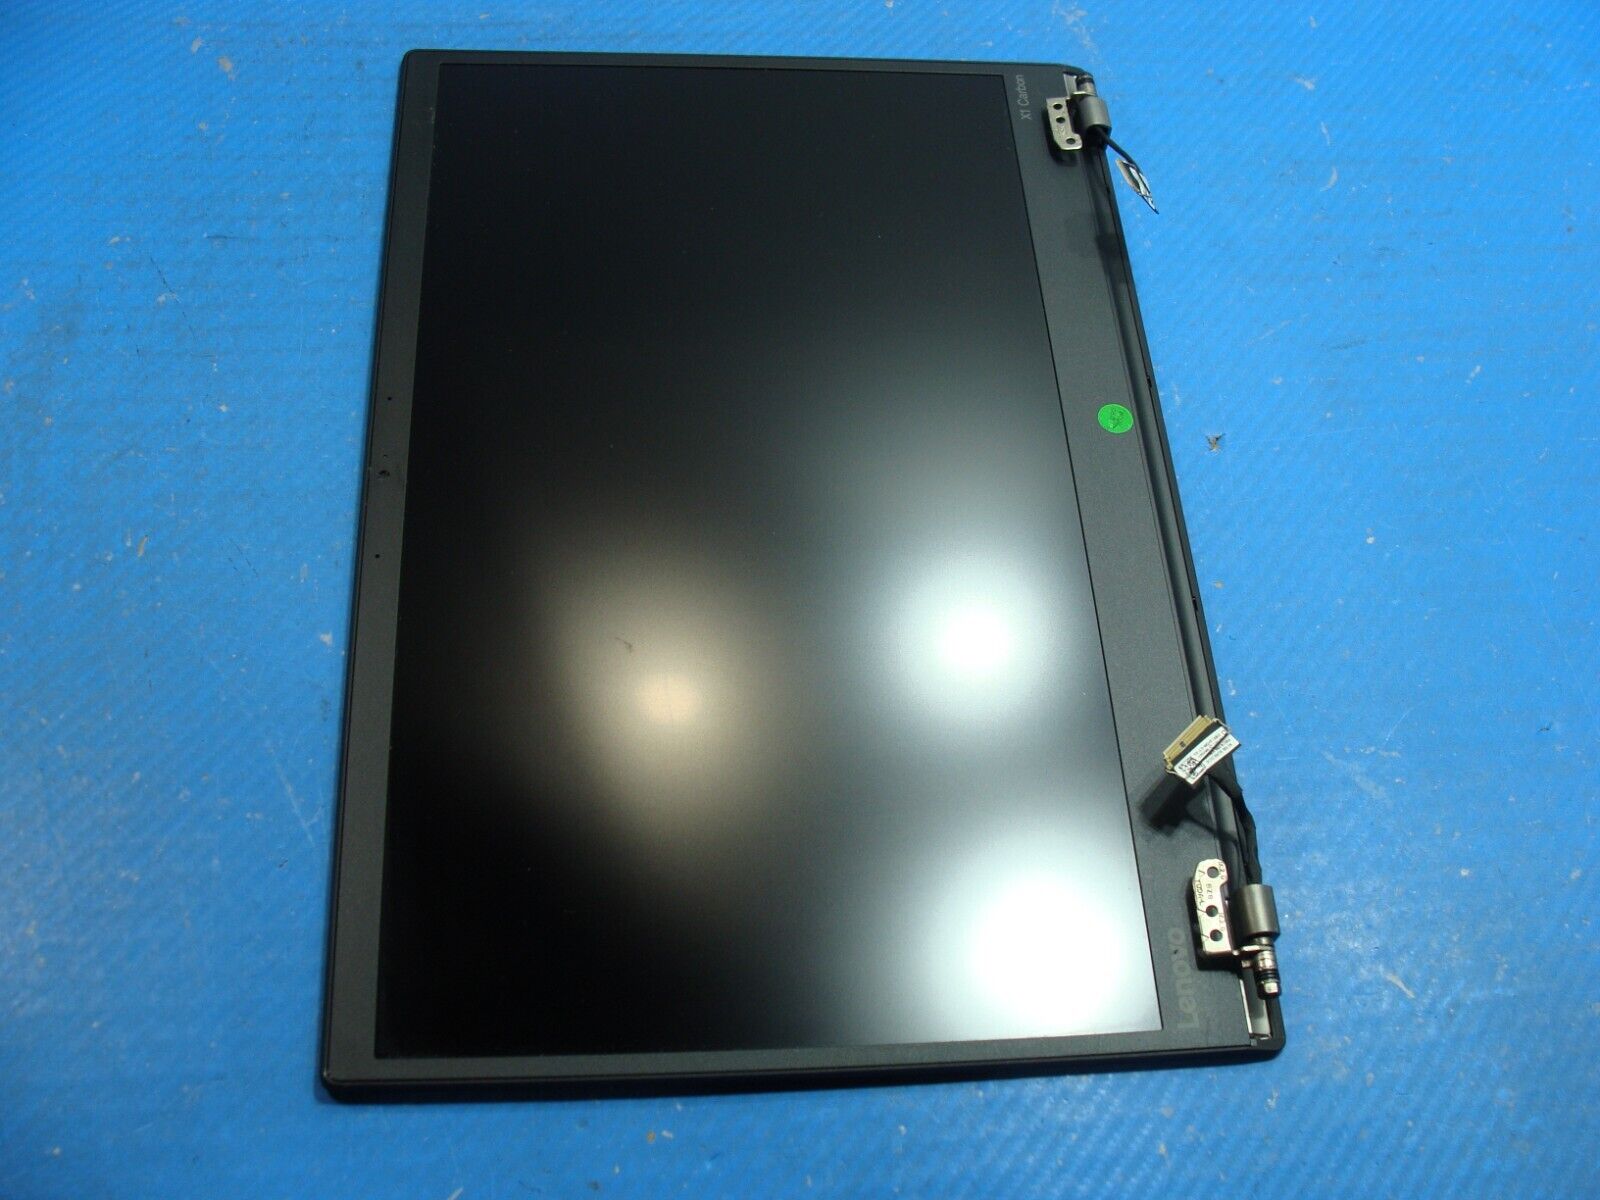 Lenovo ThinkPad X1 Carbon 5th Gen 14 OEM Matte QHD LCD Screen Complete Assembly